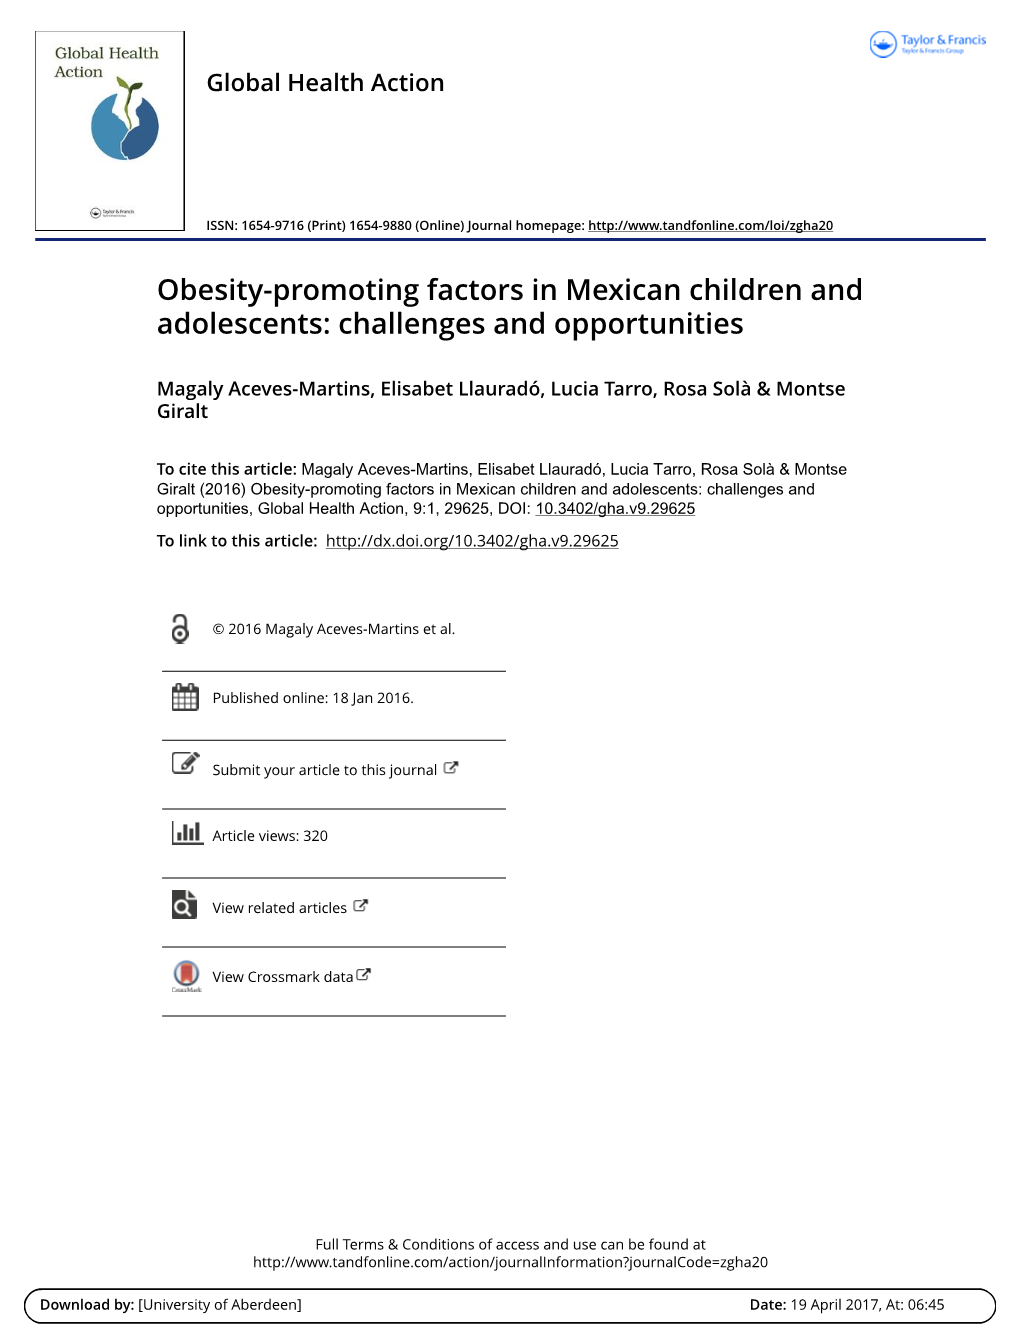 Obesity-Promoting Factors in Mexican Children and Adolescents: Challenges and Opportunities